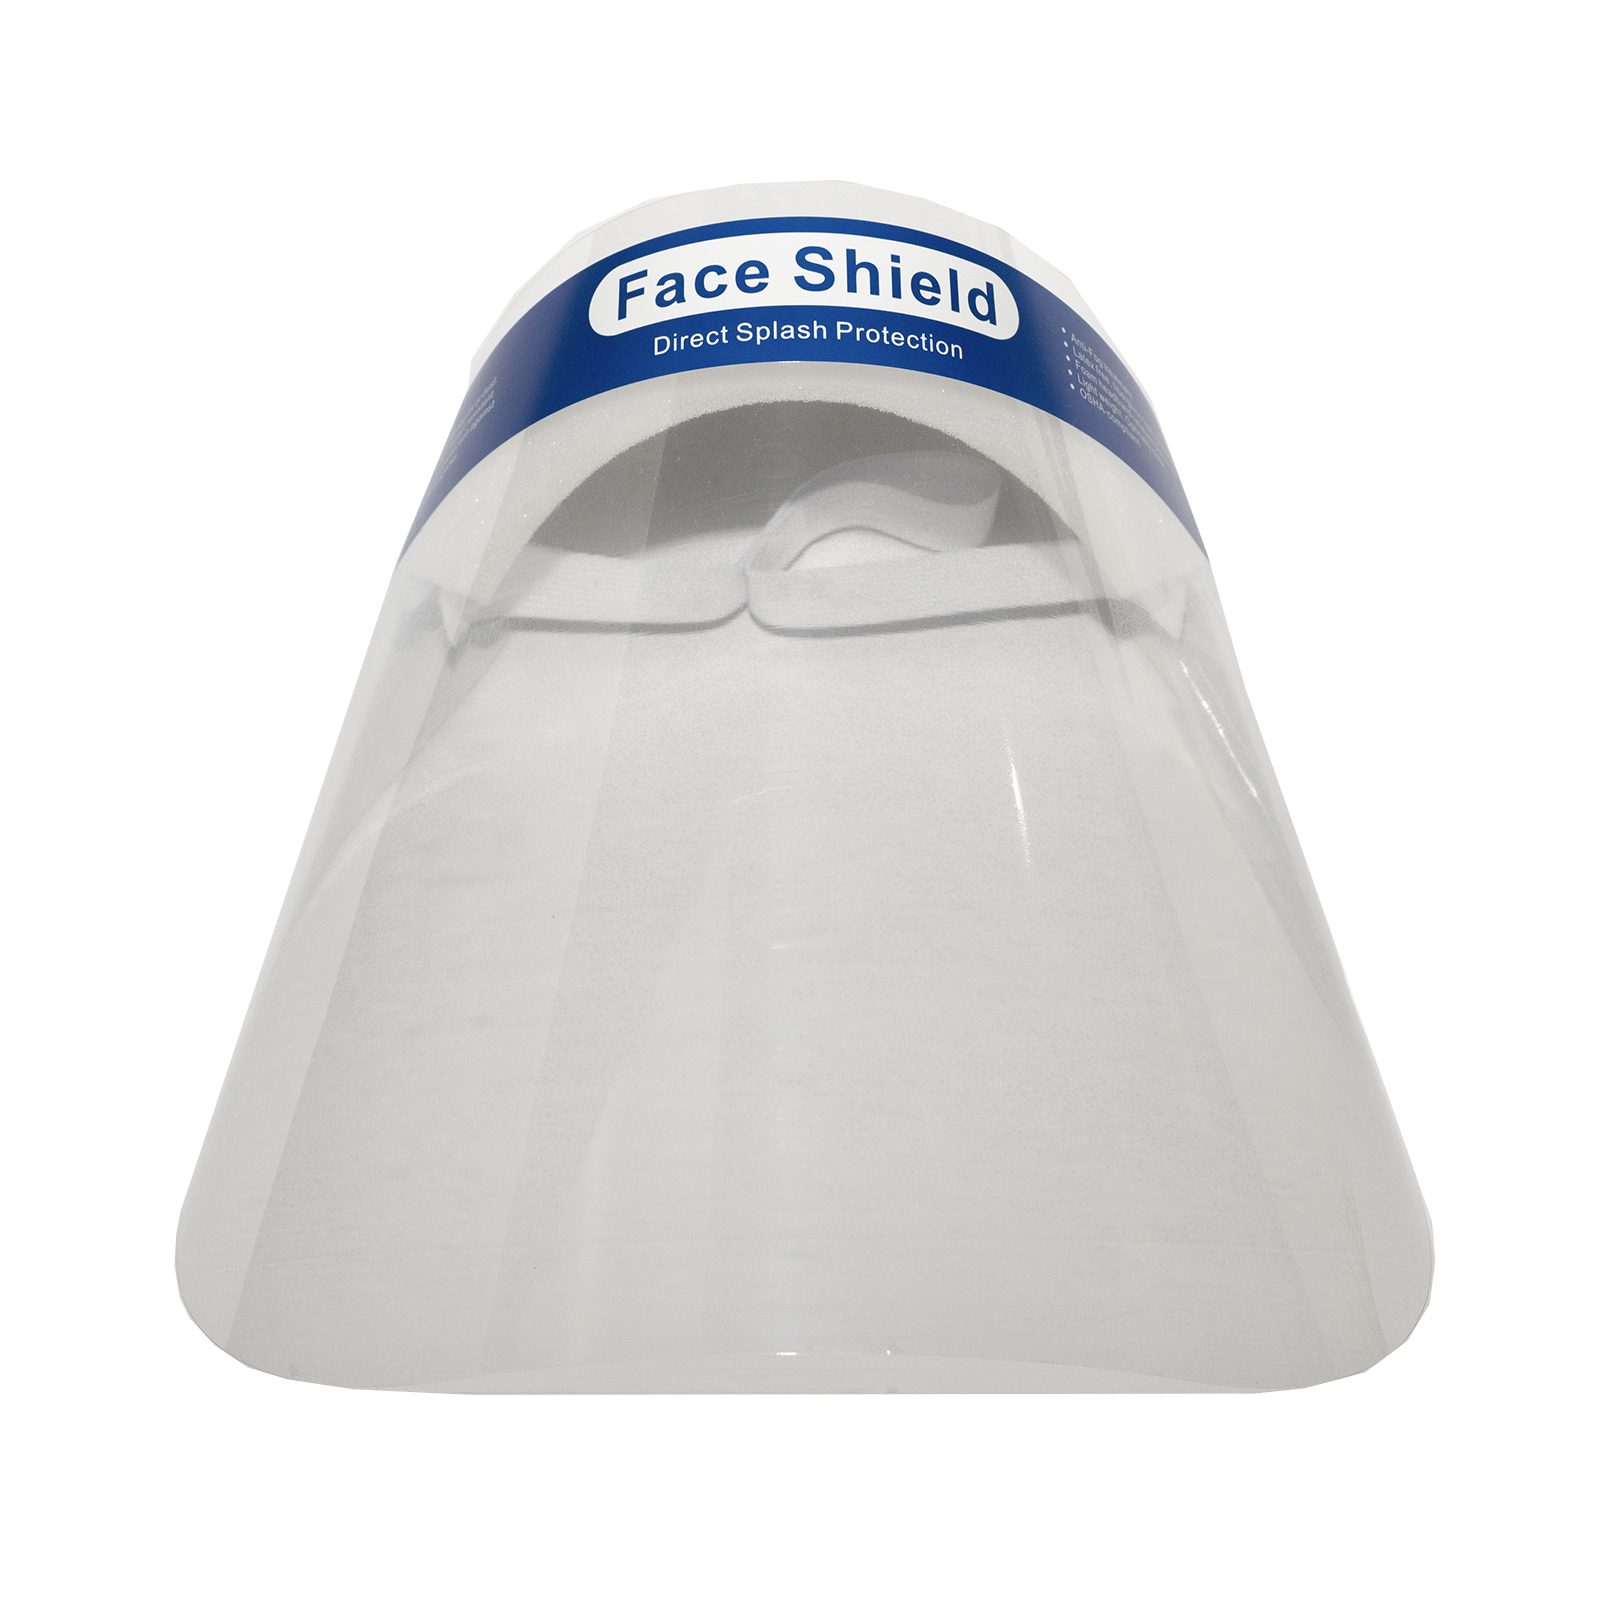 High Quality Protective Plastic Face Shield Full Face Mask Sheild